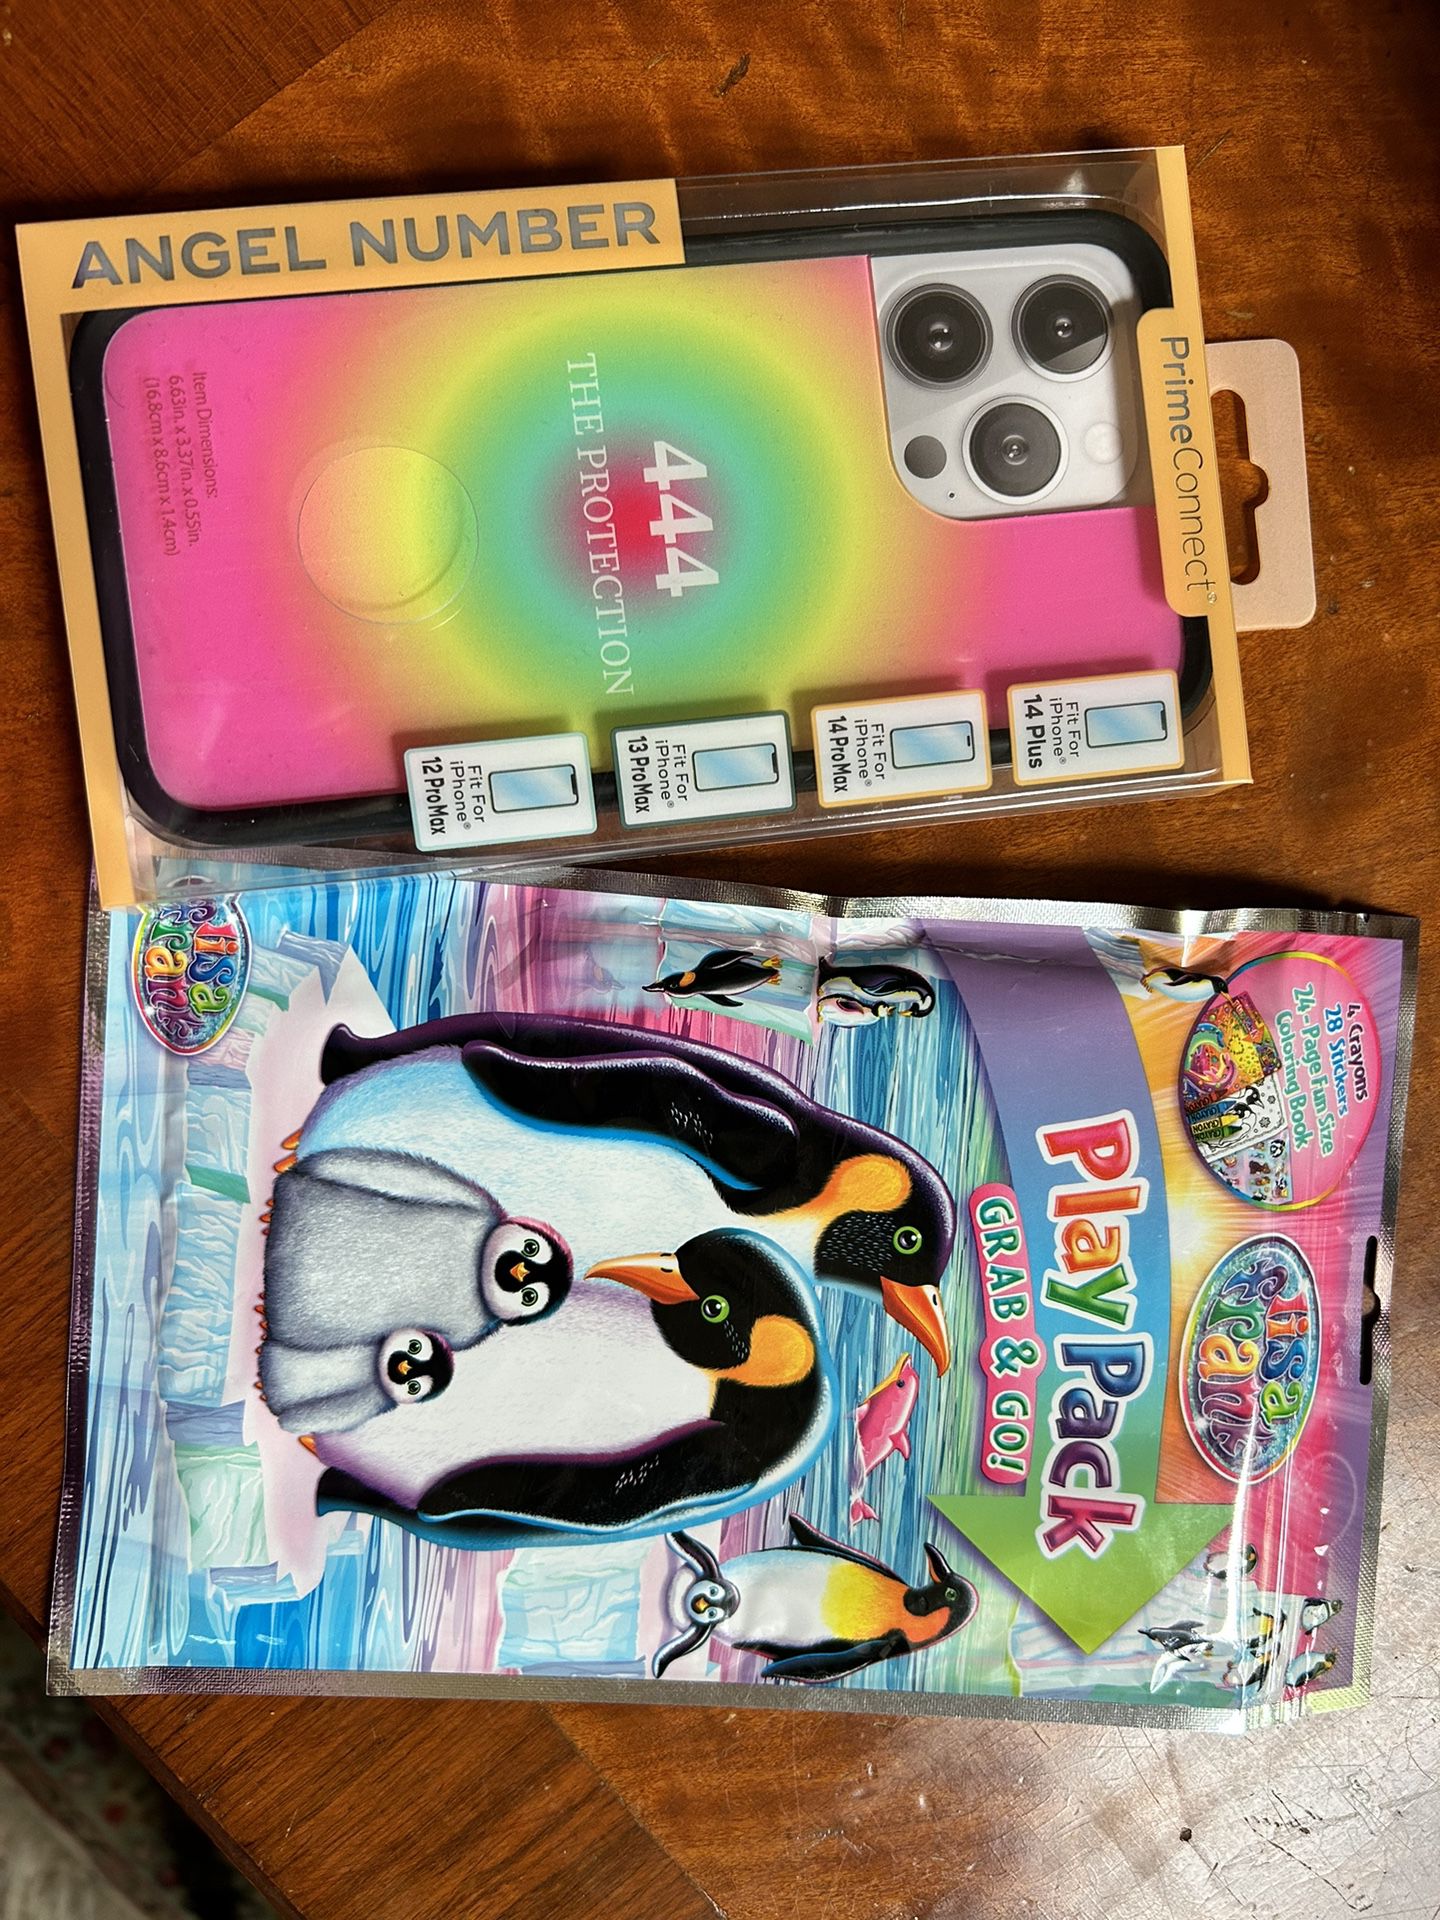 IPhone case. Spirit numbers 444. Protection. Lisa frank activity kit for free 💜 #444 #lisafrank #iphone